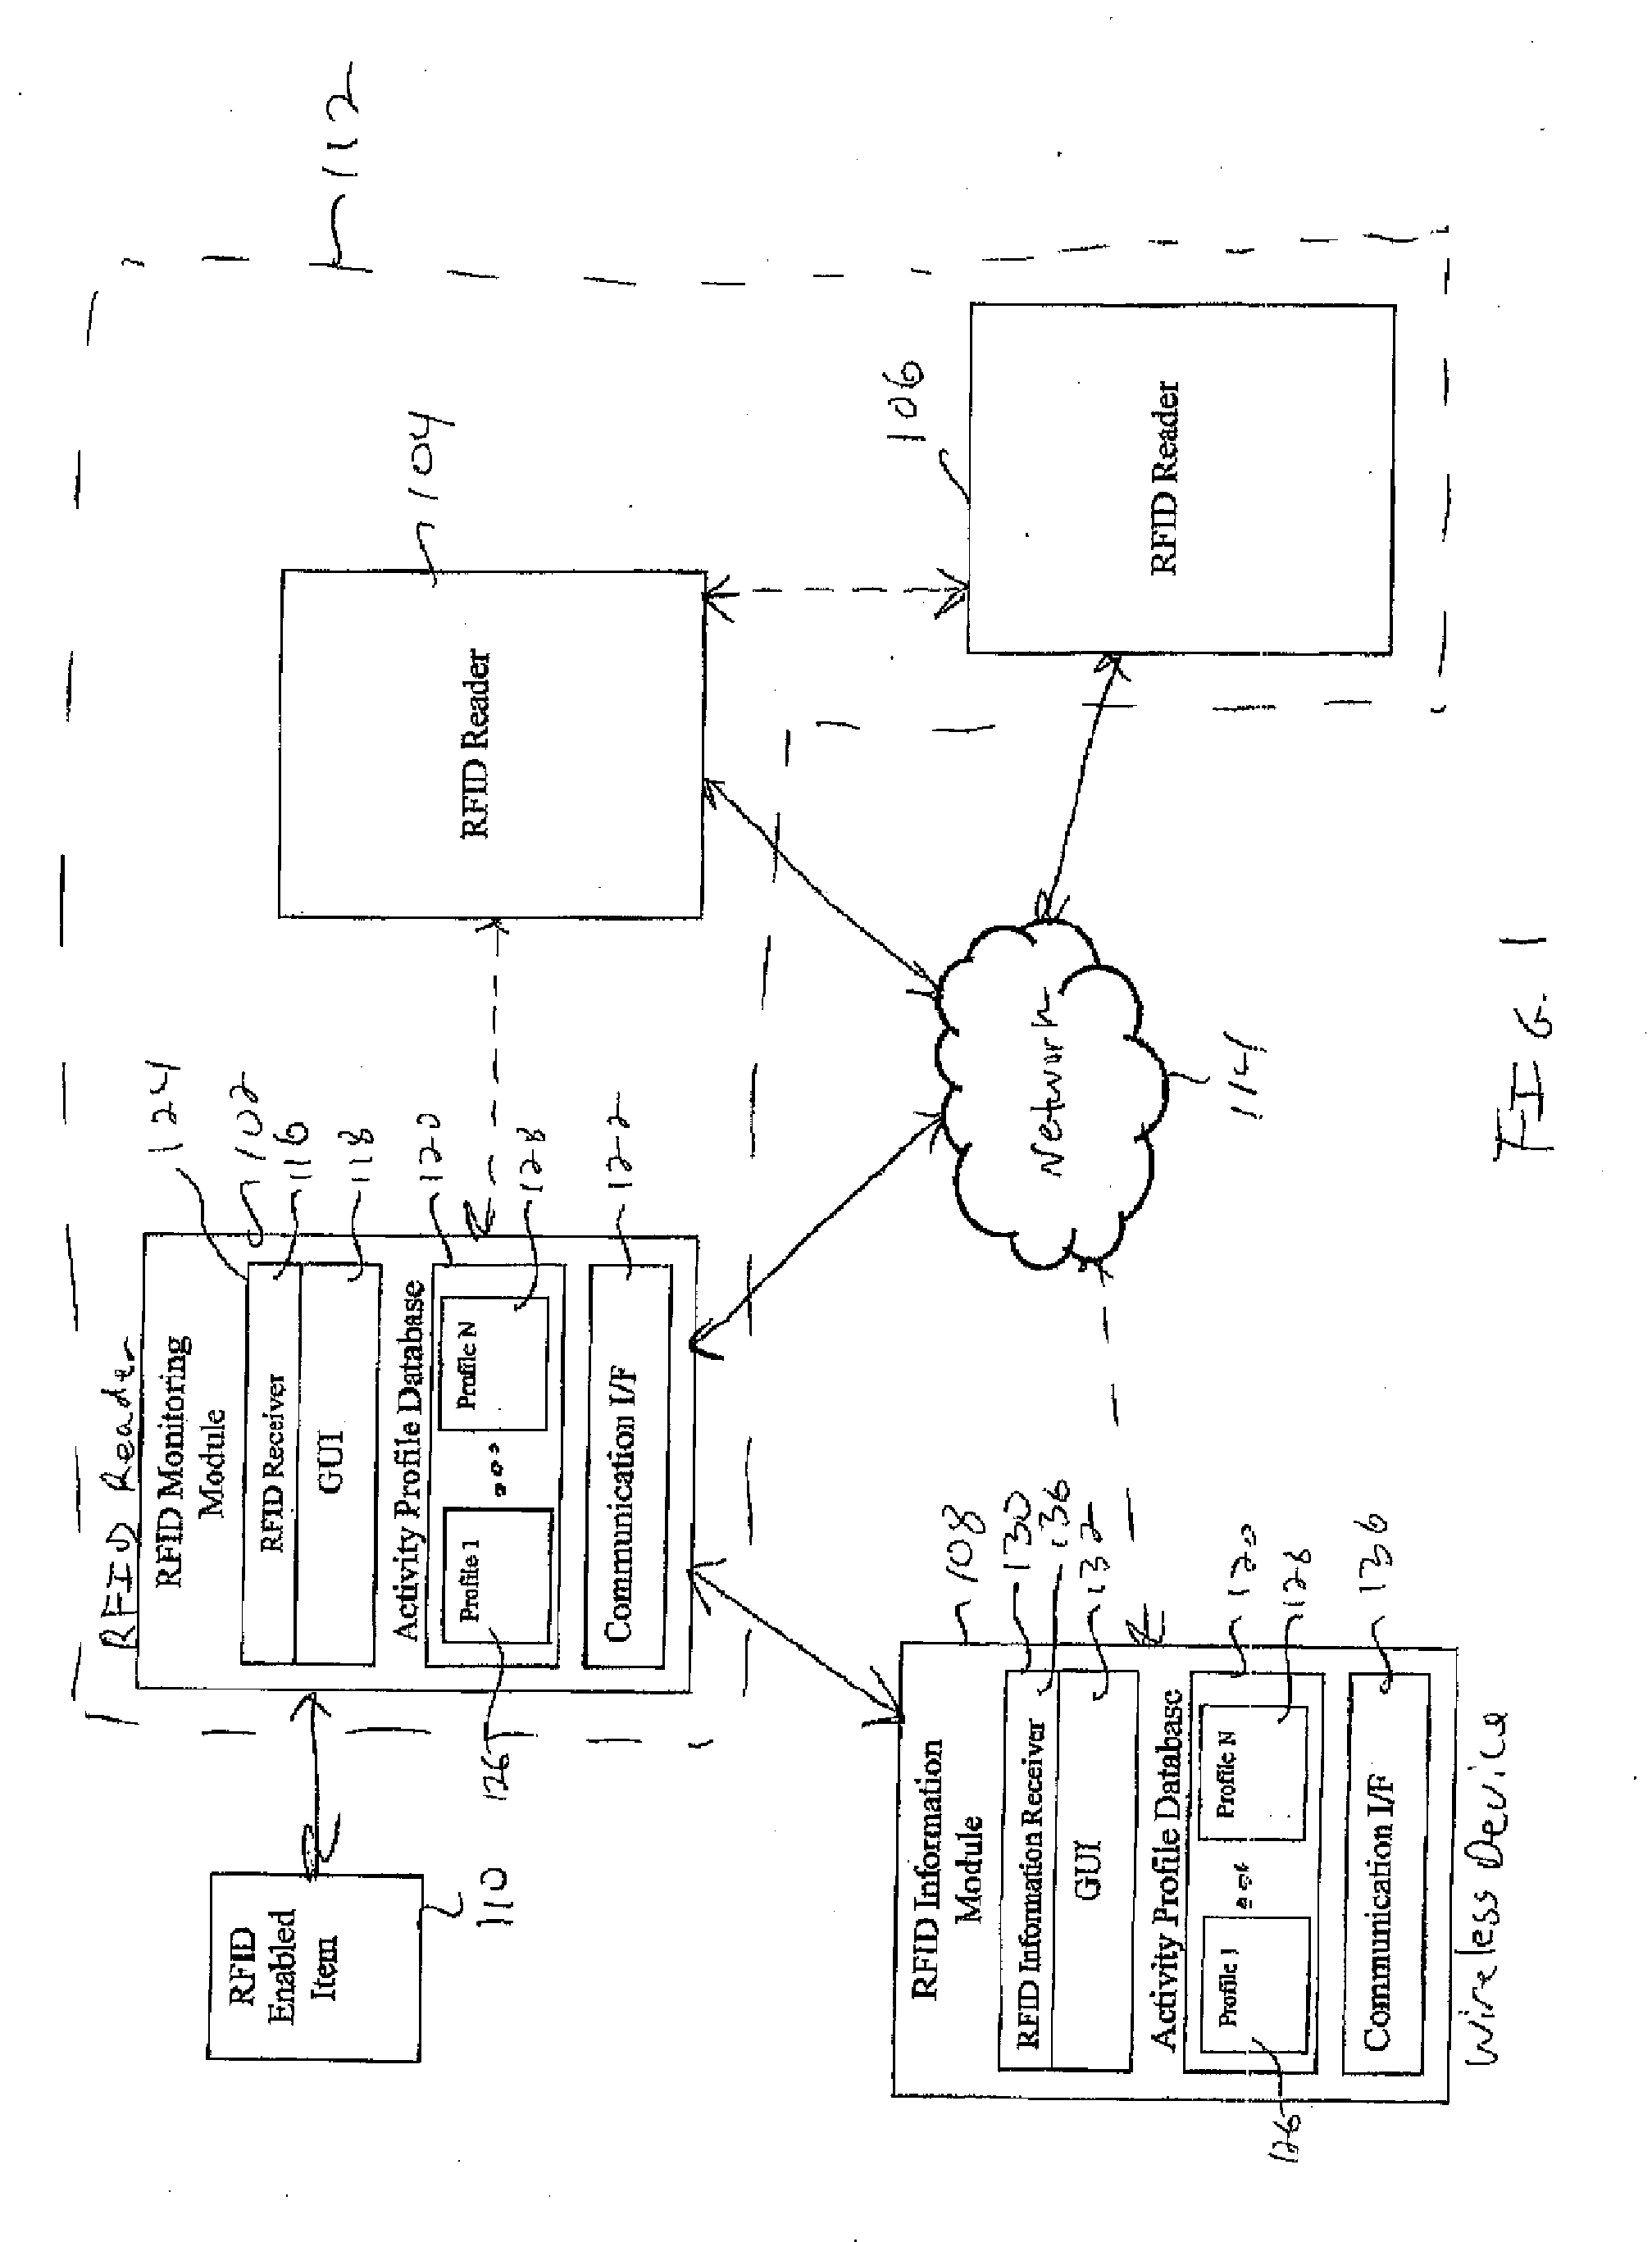 Monitoring for radio frequency enabled items based on activity profiles